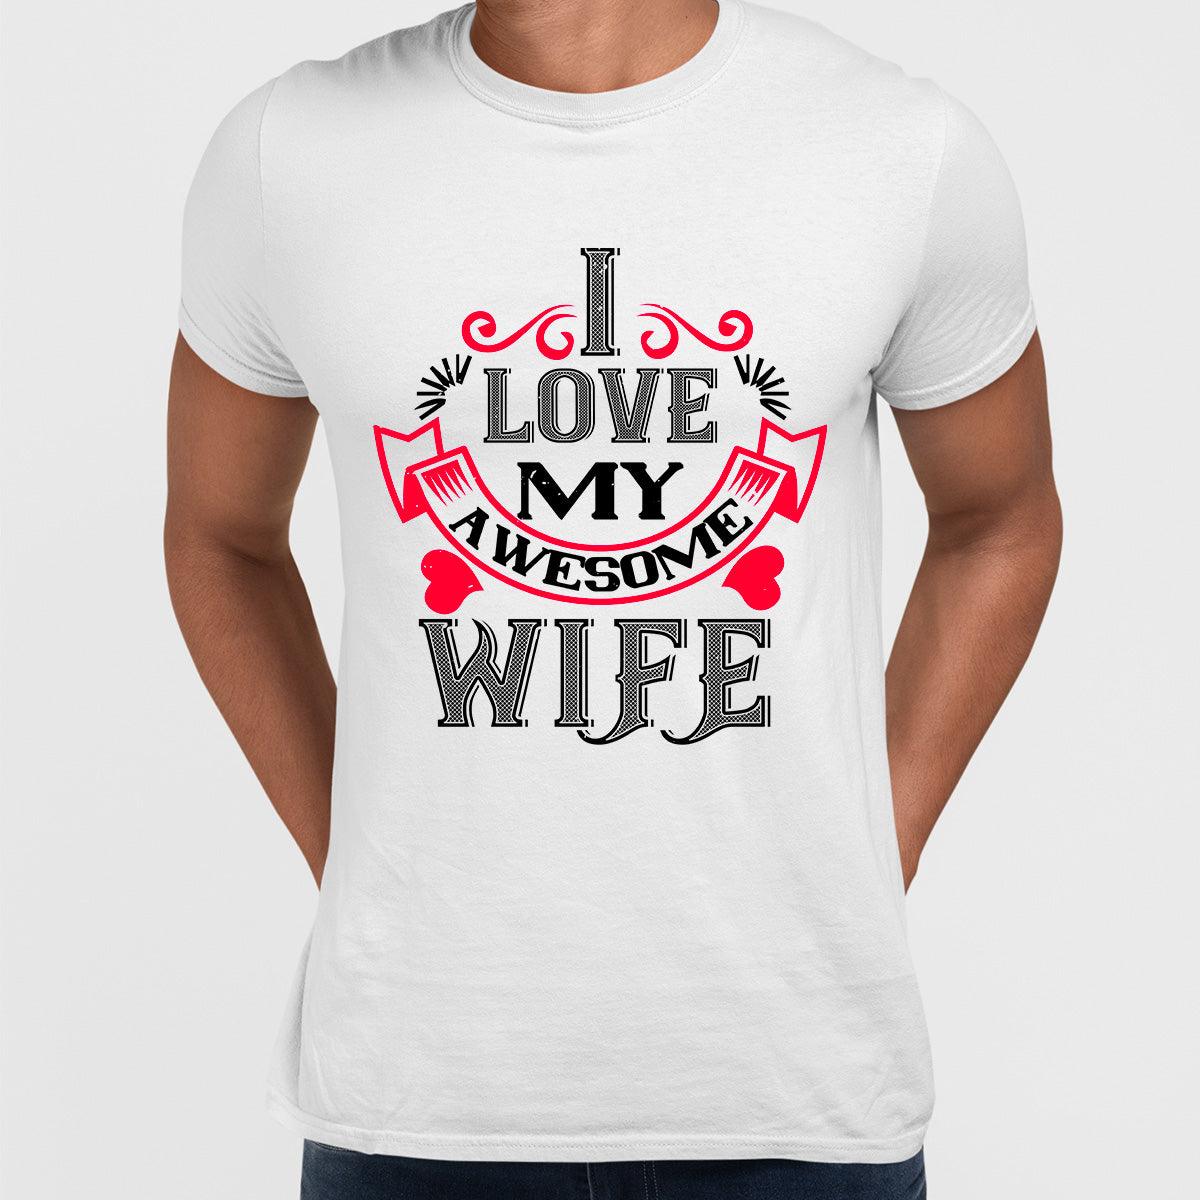 I love my awesome wife - valentine's day T-shirt edition - Kuzi Tees